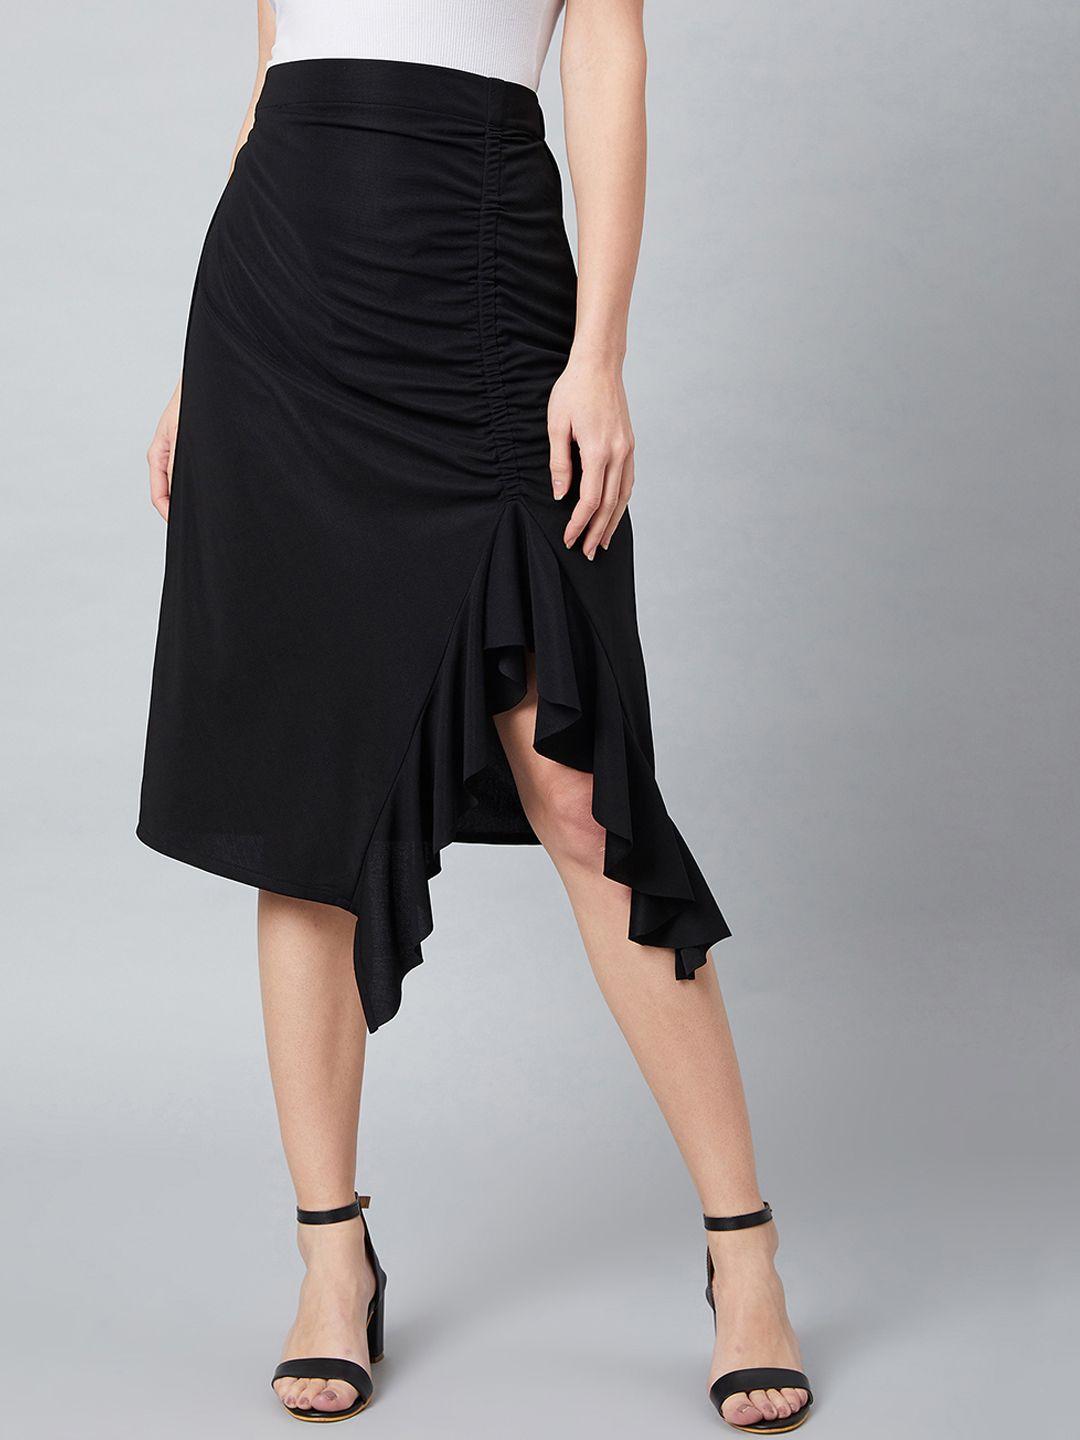 athena black a-line midi skirt with front frill detail